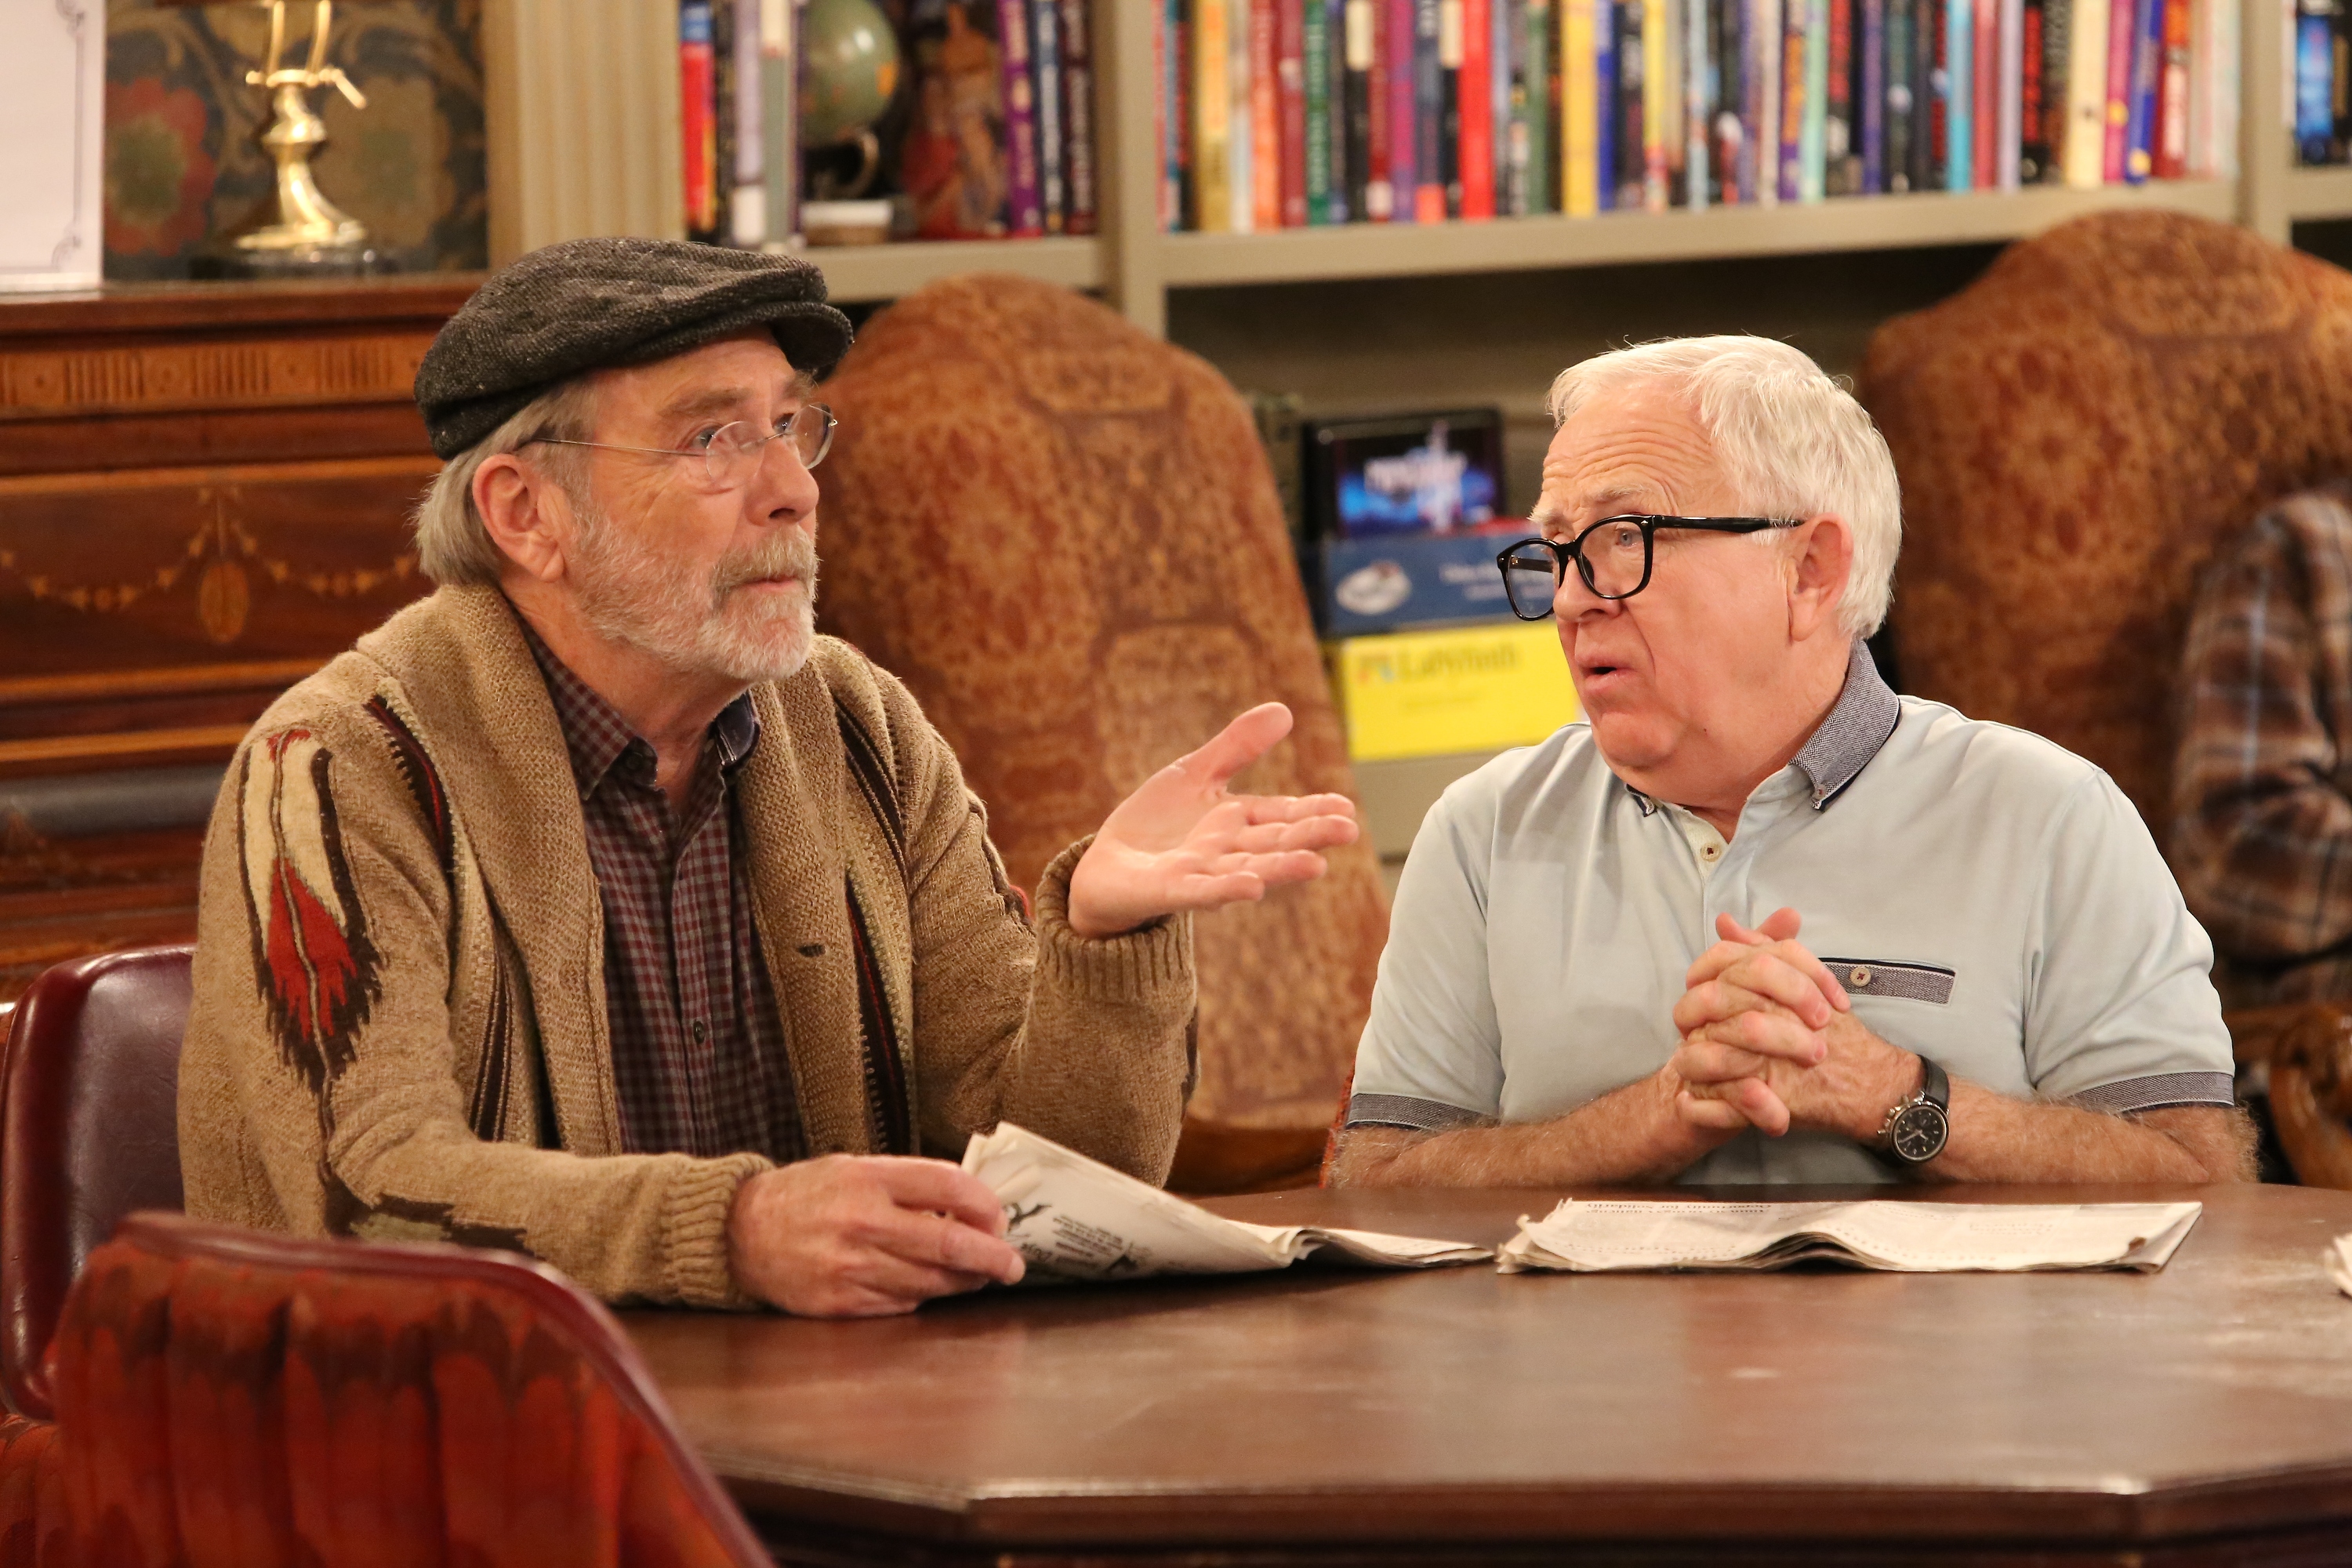 Mull and Leslie Jordan on the show Cool Kids, which aired for one season in 2018